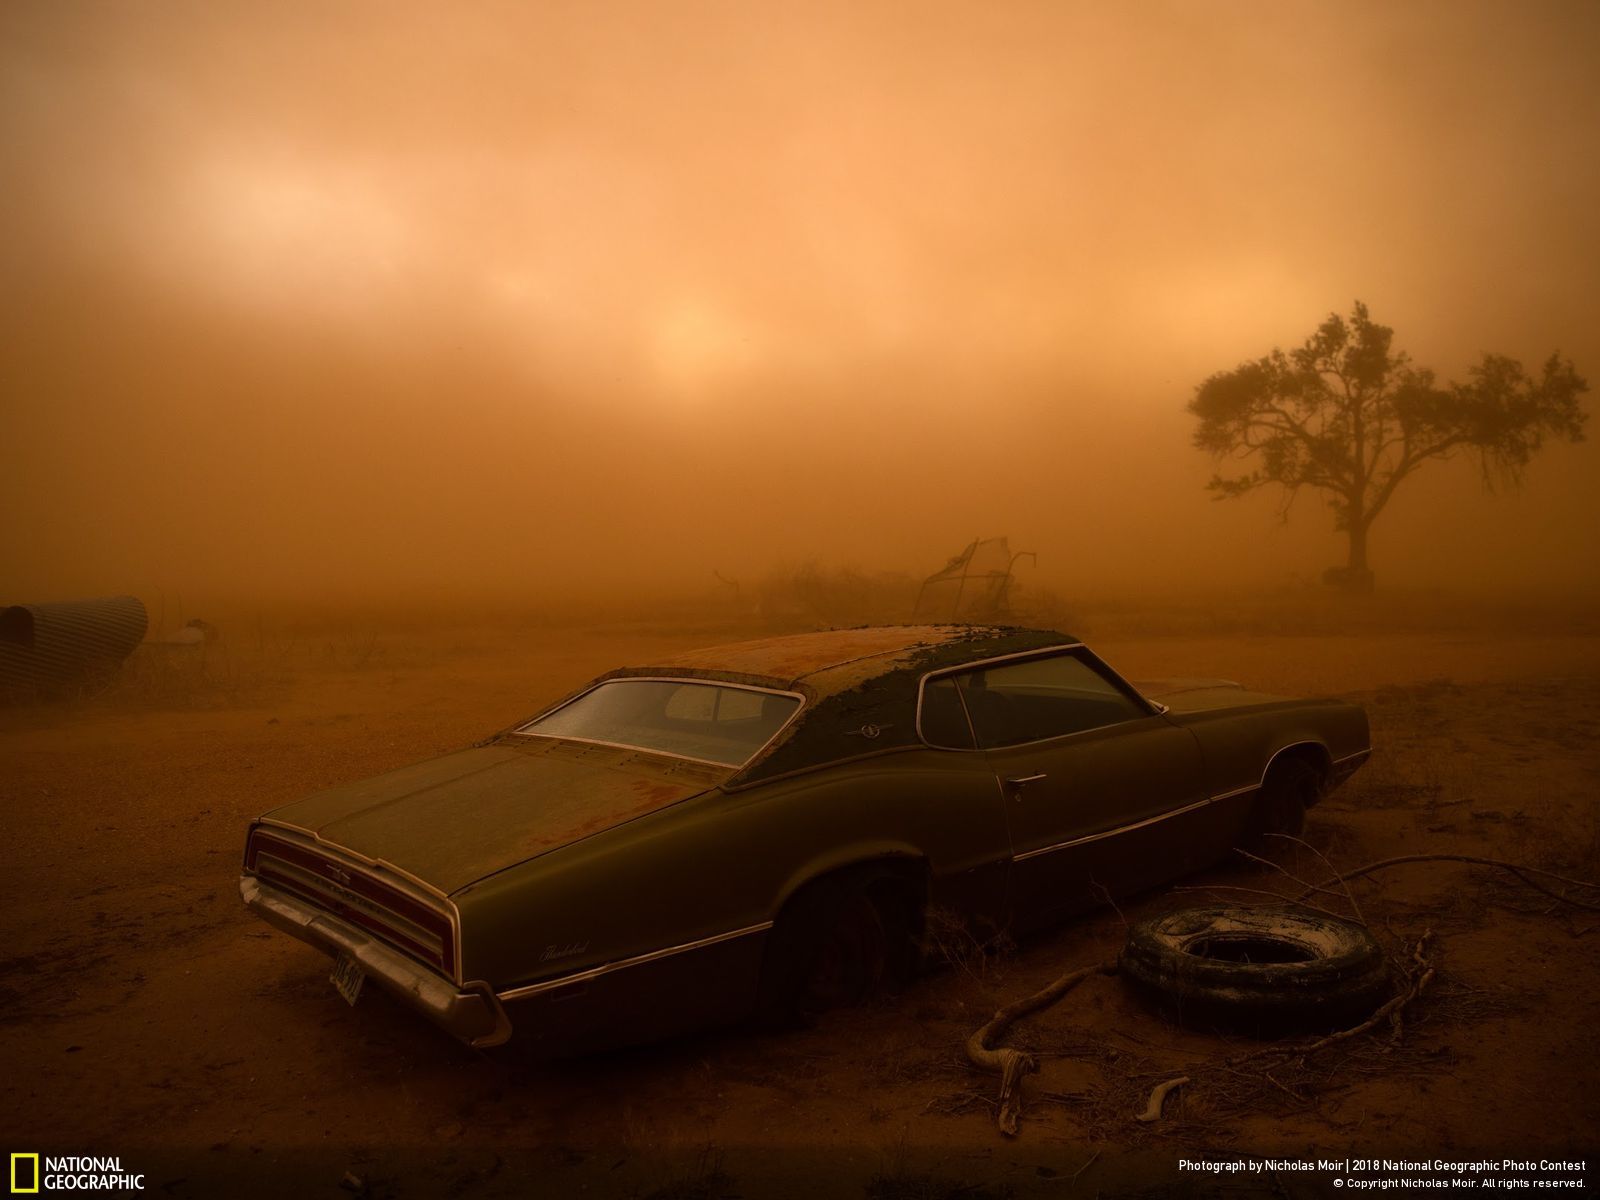 Thunderbird in the Dust, © Nicholas Moir, Second Place, Places, National Geographic Photo Contest